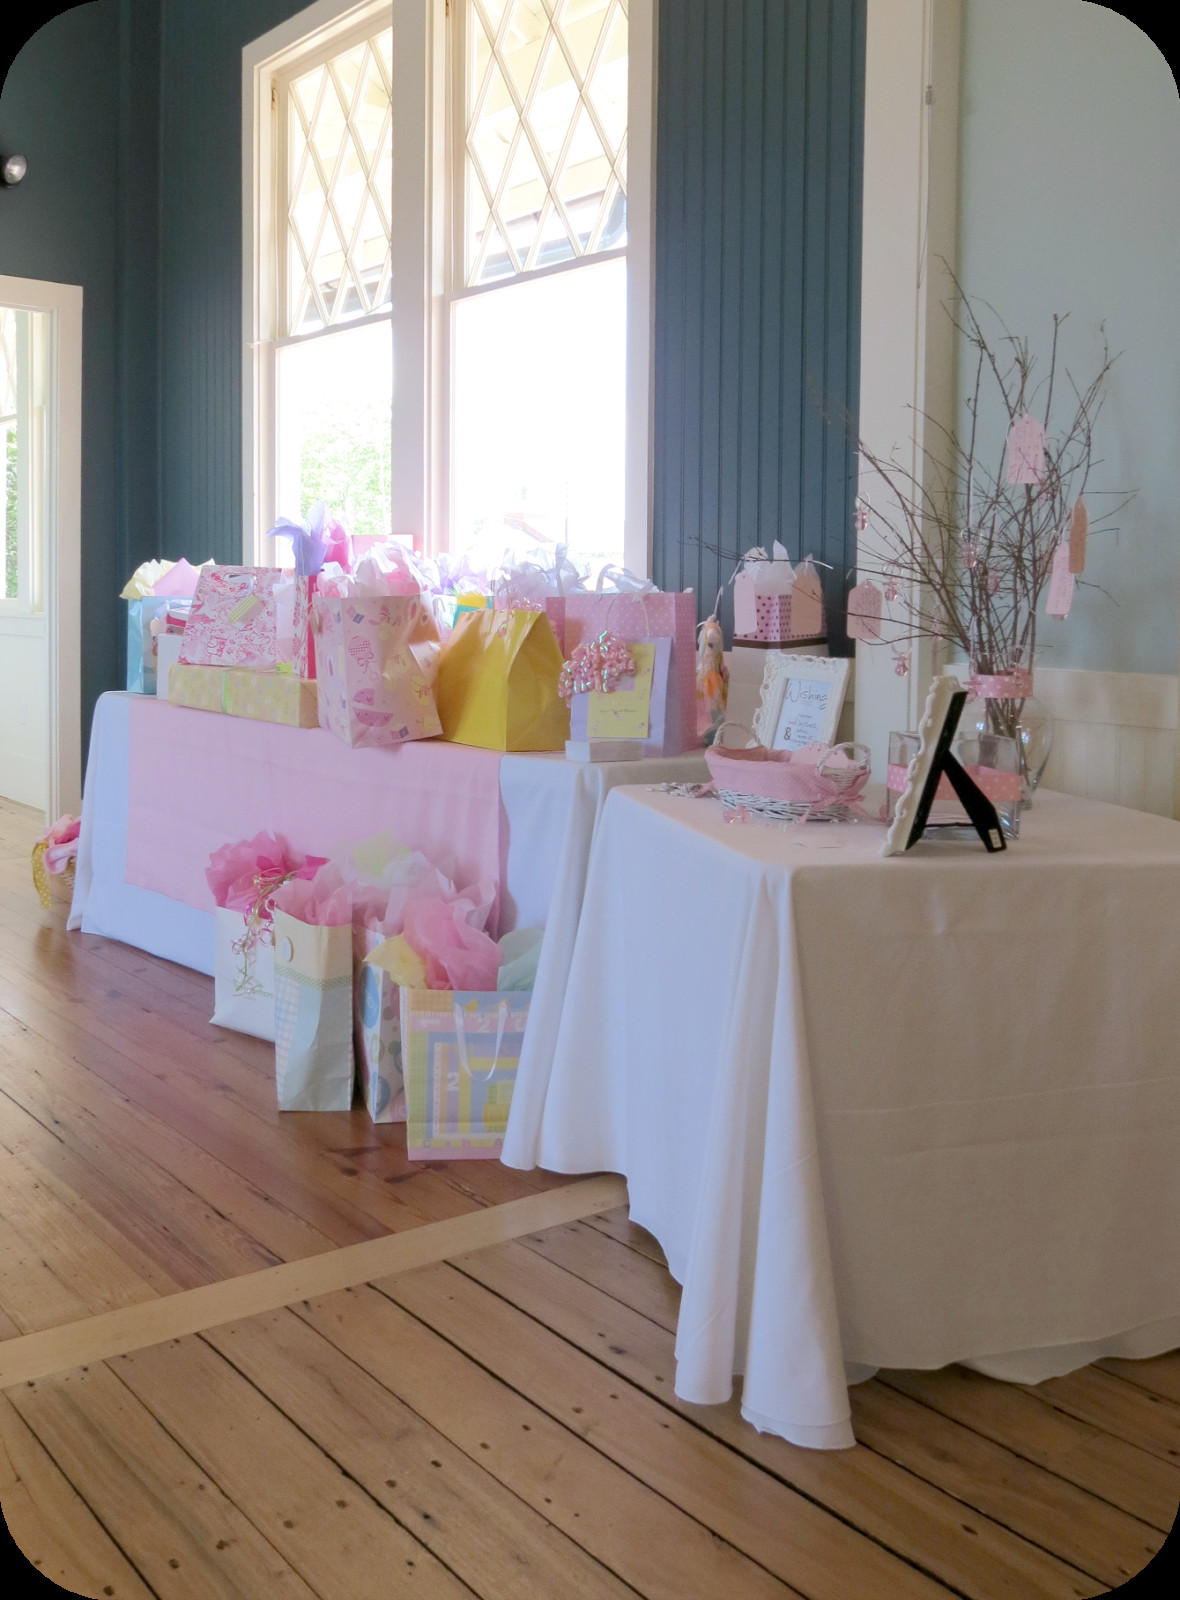 Gift Table Baby Shower Ideas
 Sweet Beginnings Baby Shower